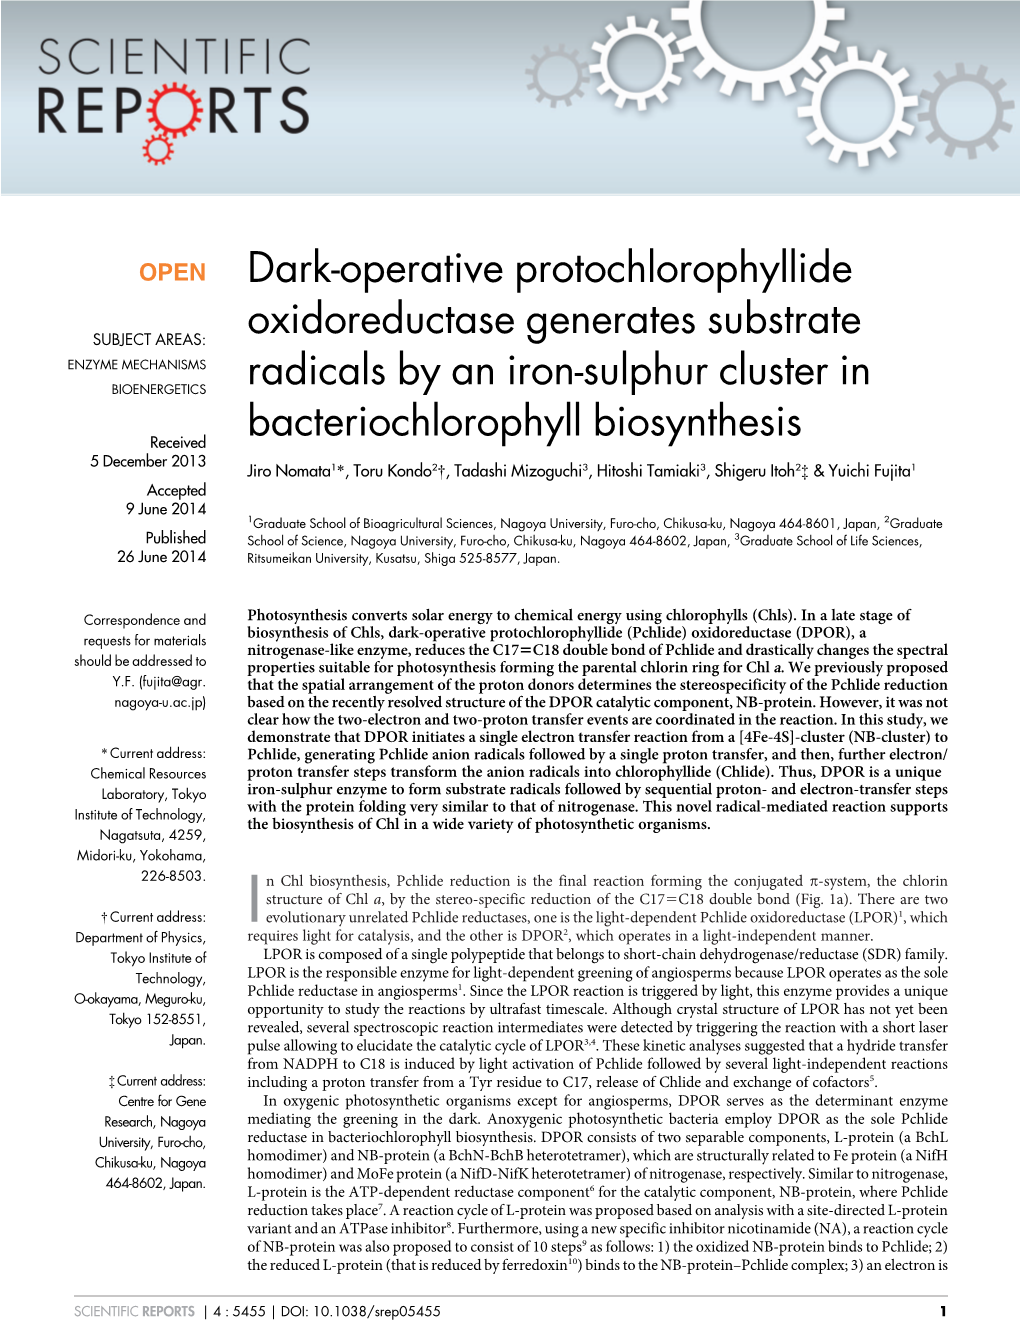 Dark-Operative Protochlorophyllide Oxidoreductase Generates Substrate Radicals by an Iron-Sulphur Cluster in Bacteriochlorophyll